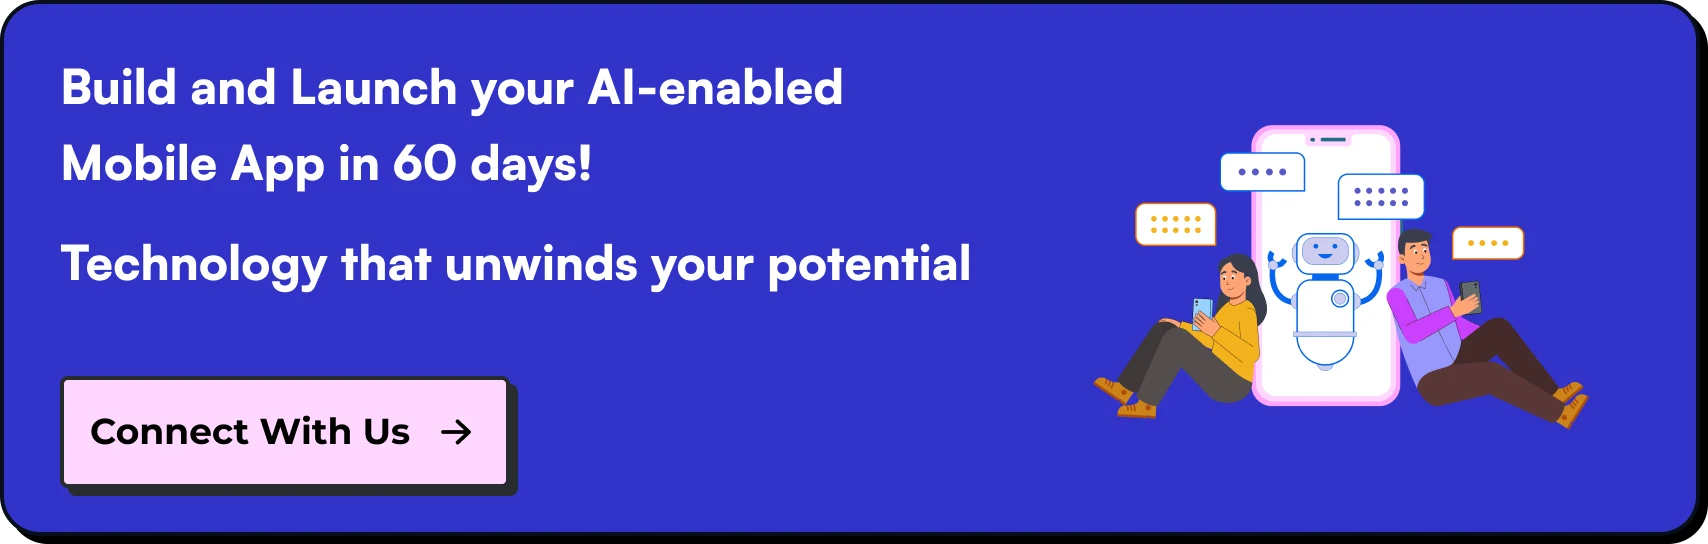 Build and Launch your AI-enabled Mobile App in 60 days